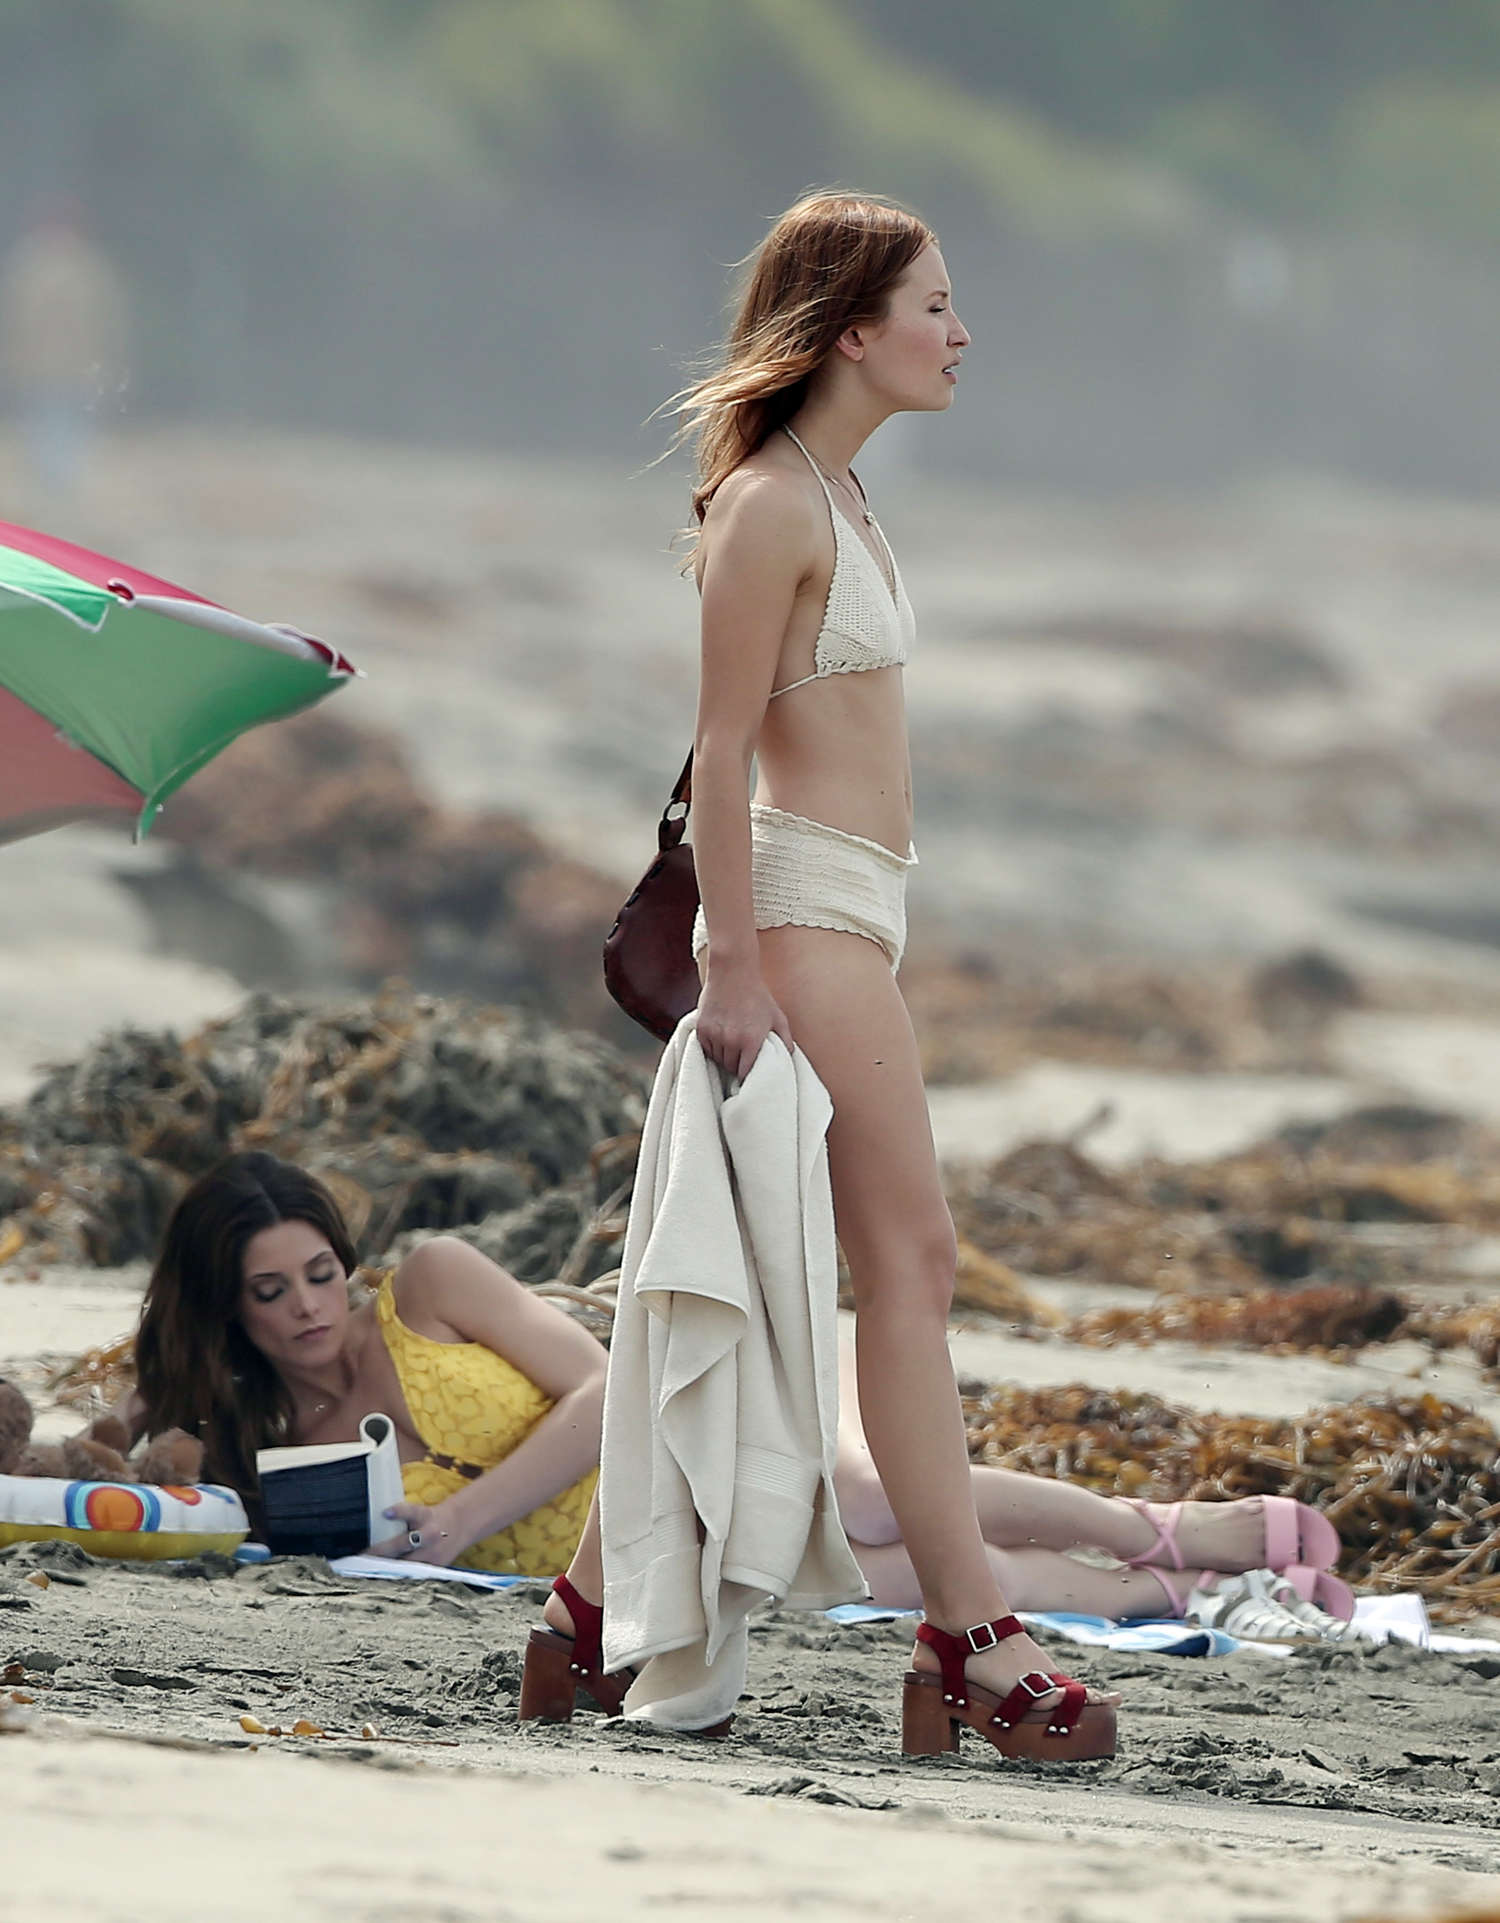 Emily Browning - Filming a Beach Scene for "The Shangri-La" in Lo...